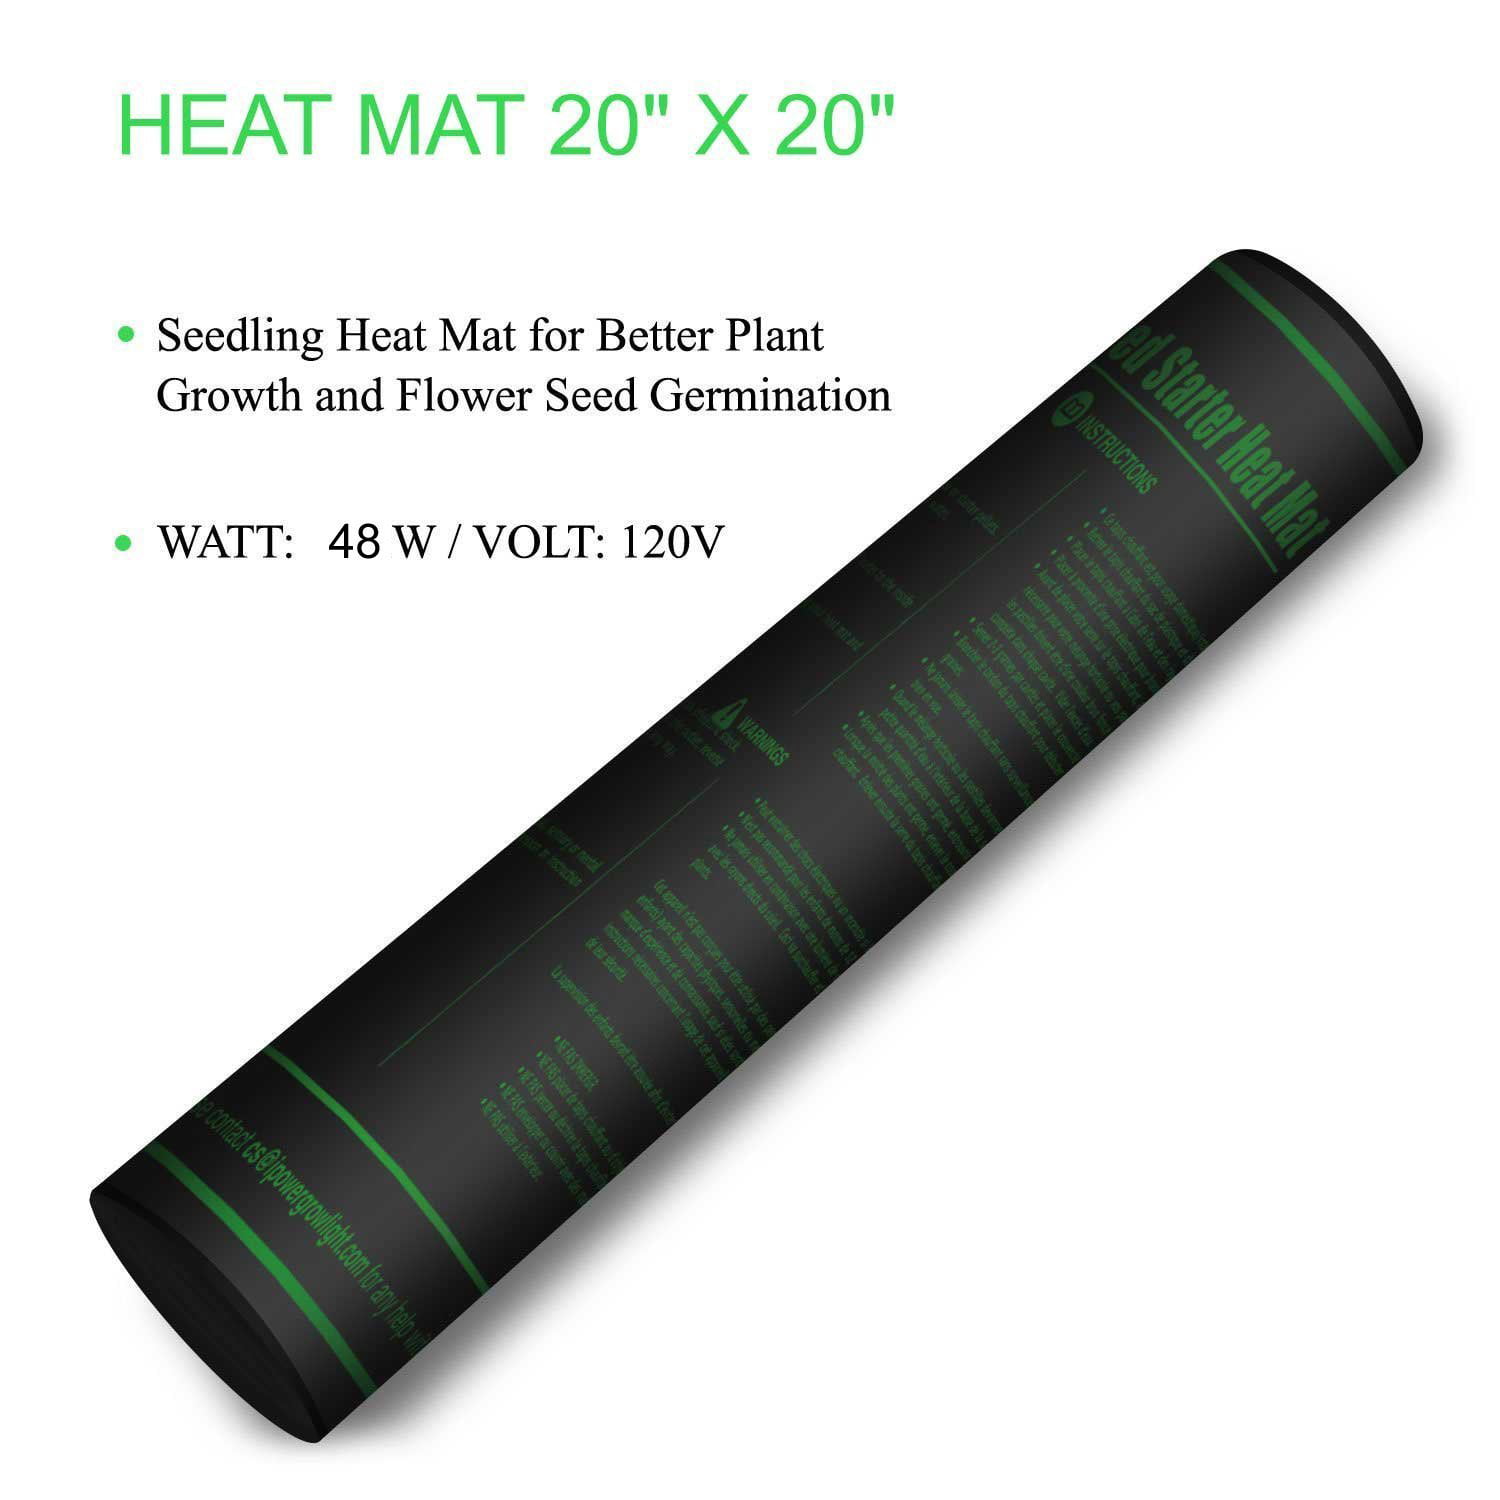 Black iPower GLHTMTL-A 48 x 20 Waterproof Durable Seedling Heat Mat Warm Hydroponic Plant for Indoor Gardening Germination Starting 